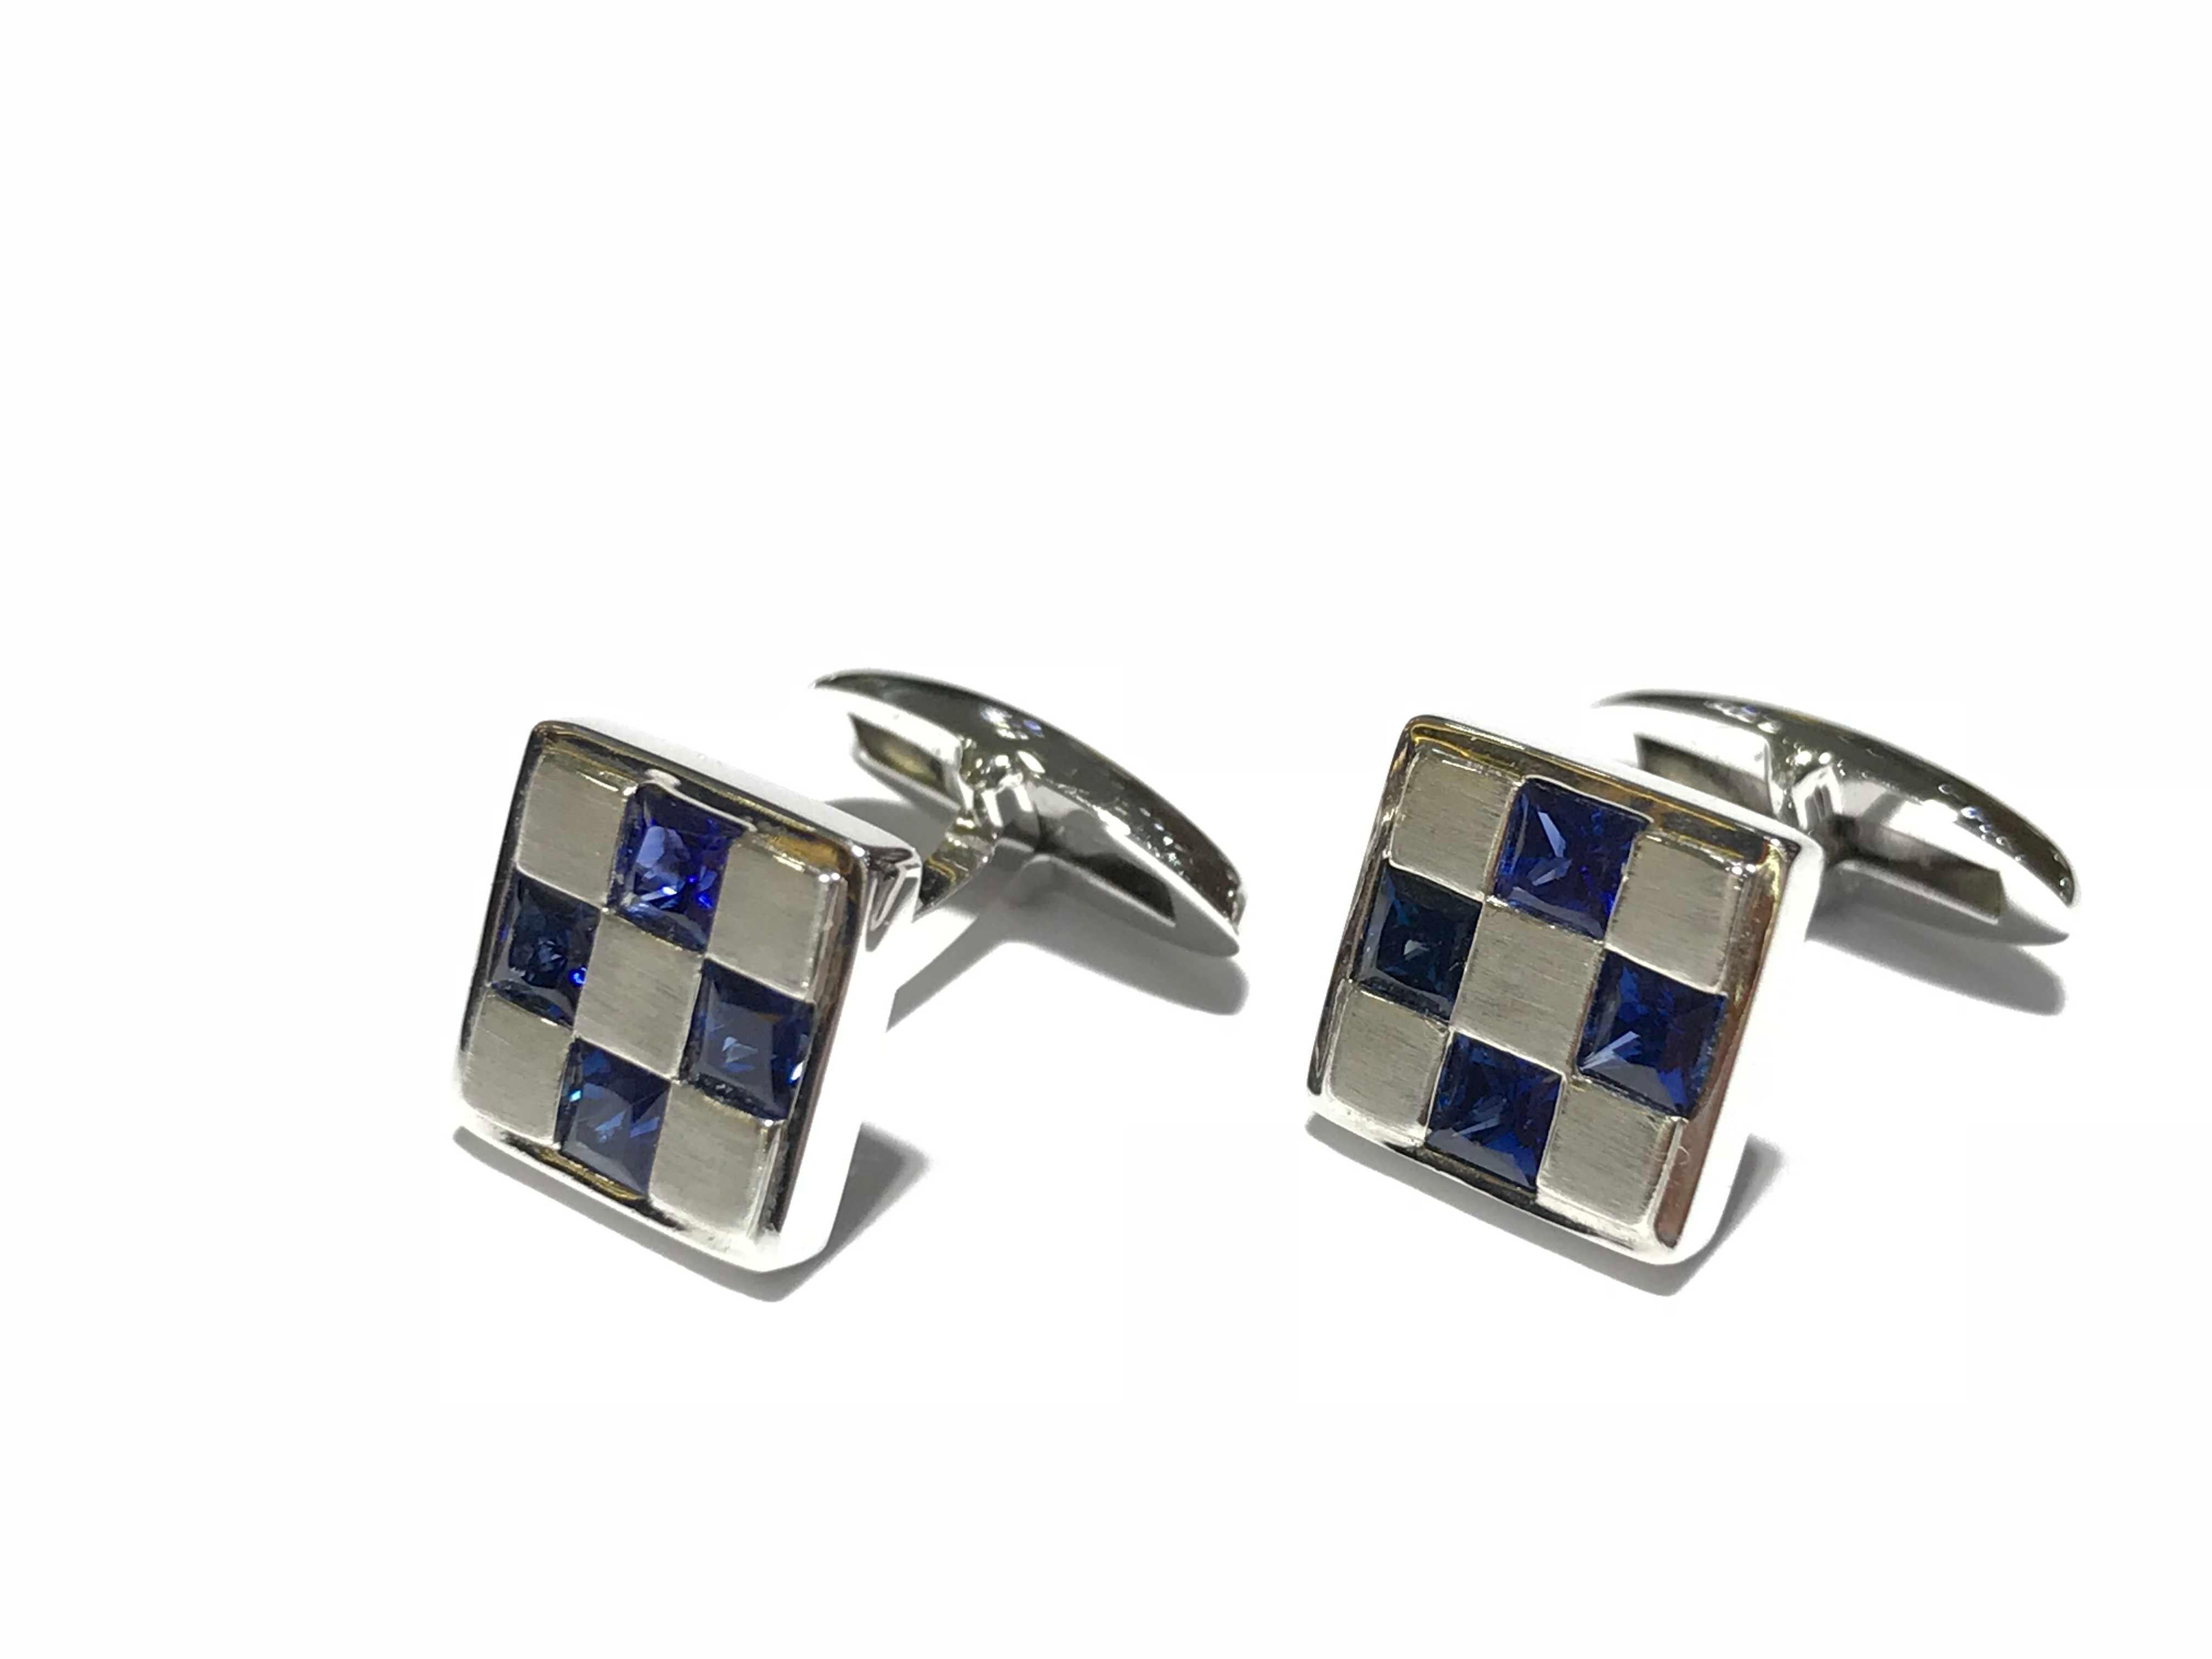 Men's Italian made cufflinks in 18 carat white gold with 4 pricess cut sapphires 
1.60 carat sapphire 
